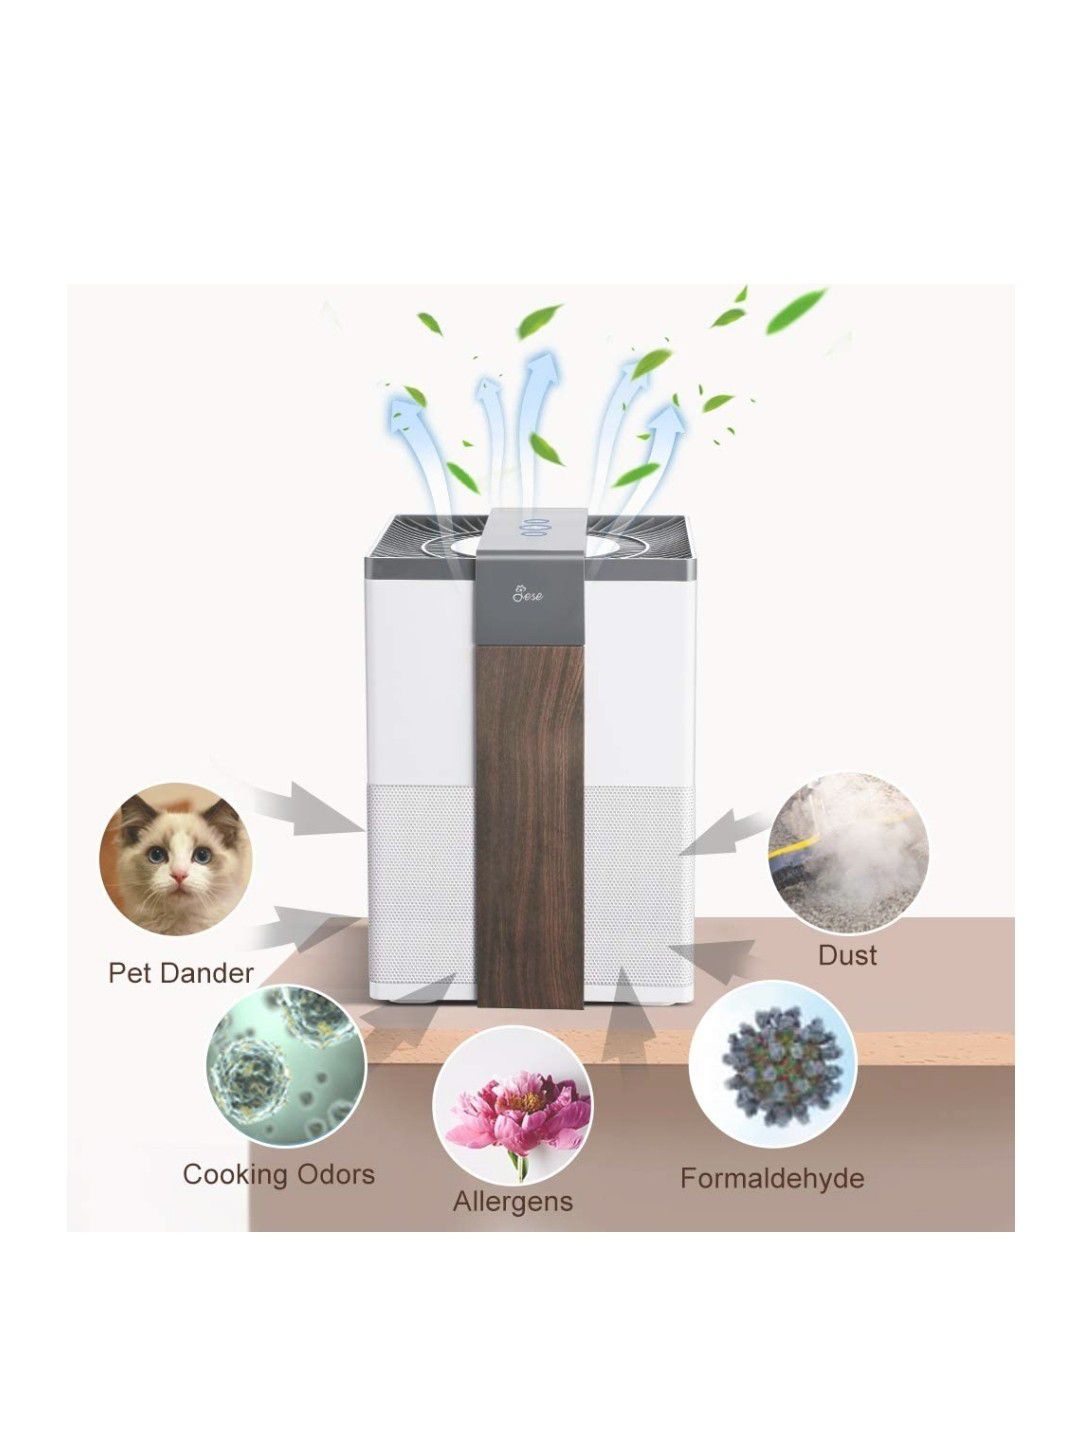 Jese Air Purifier,3 Stage Filtration System with True HEPA Air Filter for Home Allergies, Air Cleaner Remove Formaldehyde with Charcoal Cloth Filter